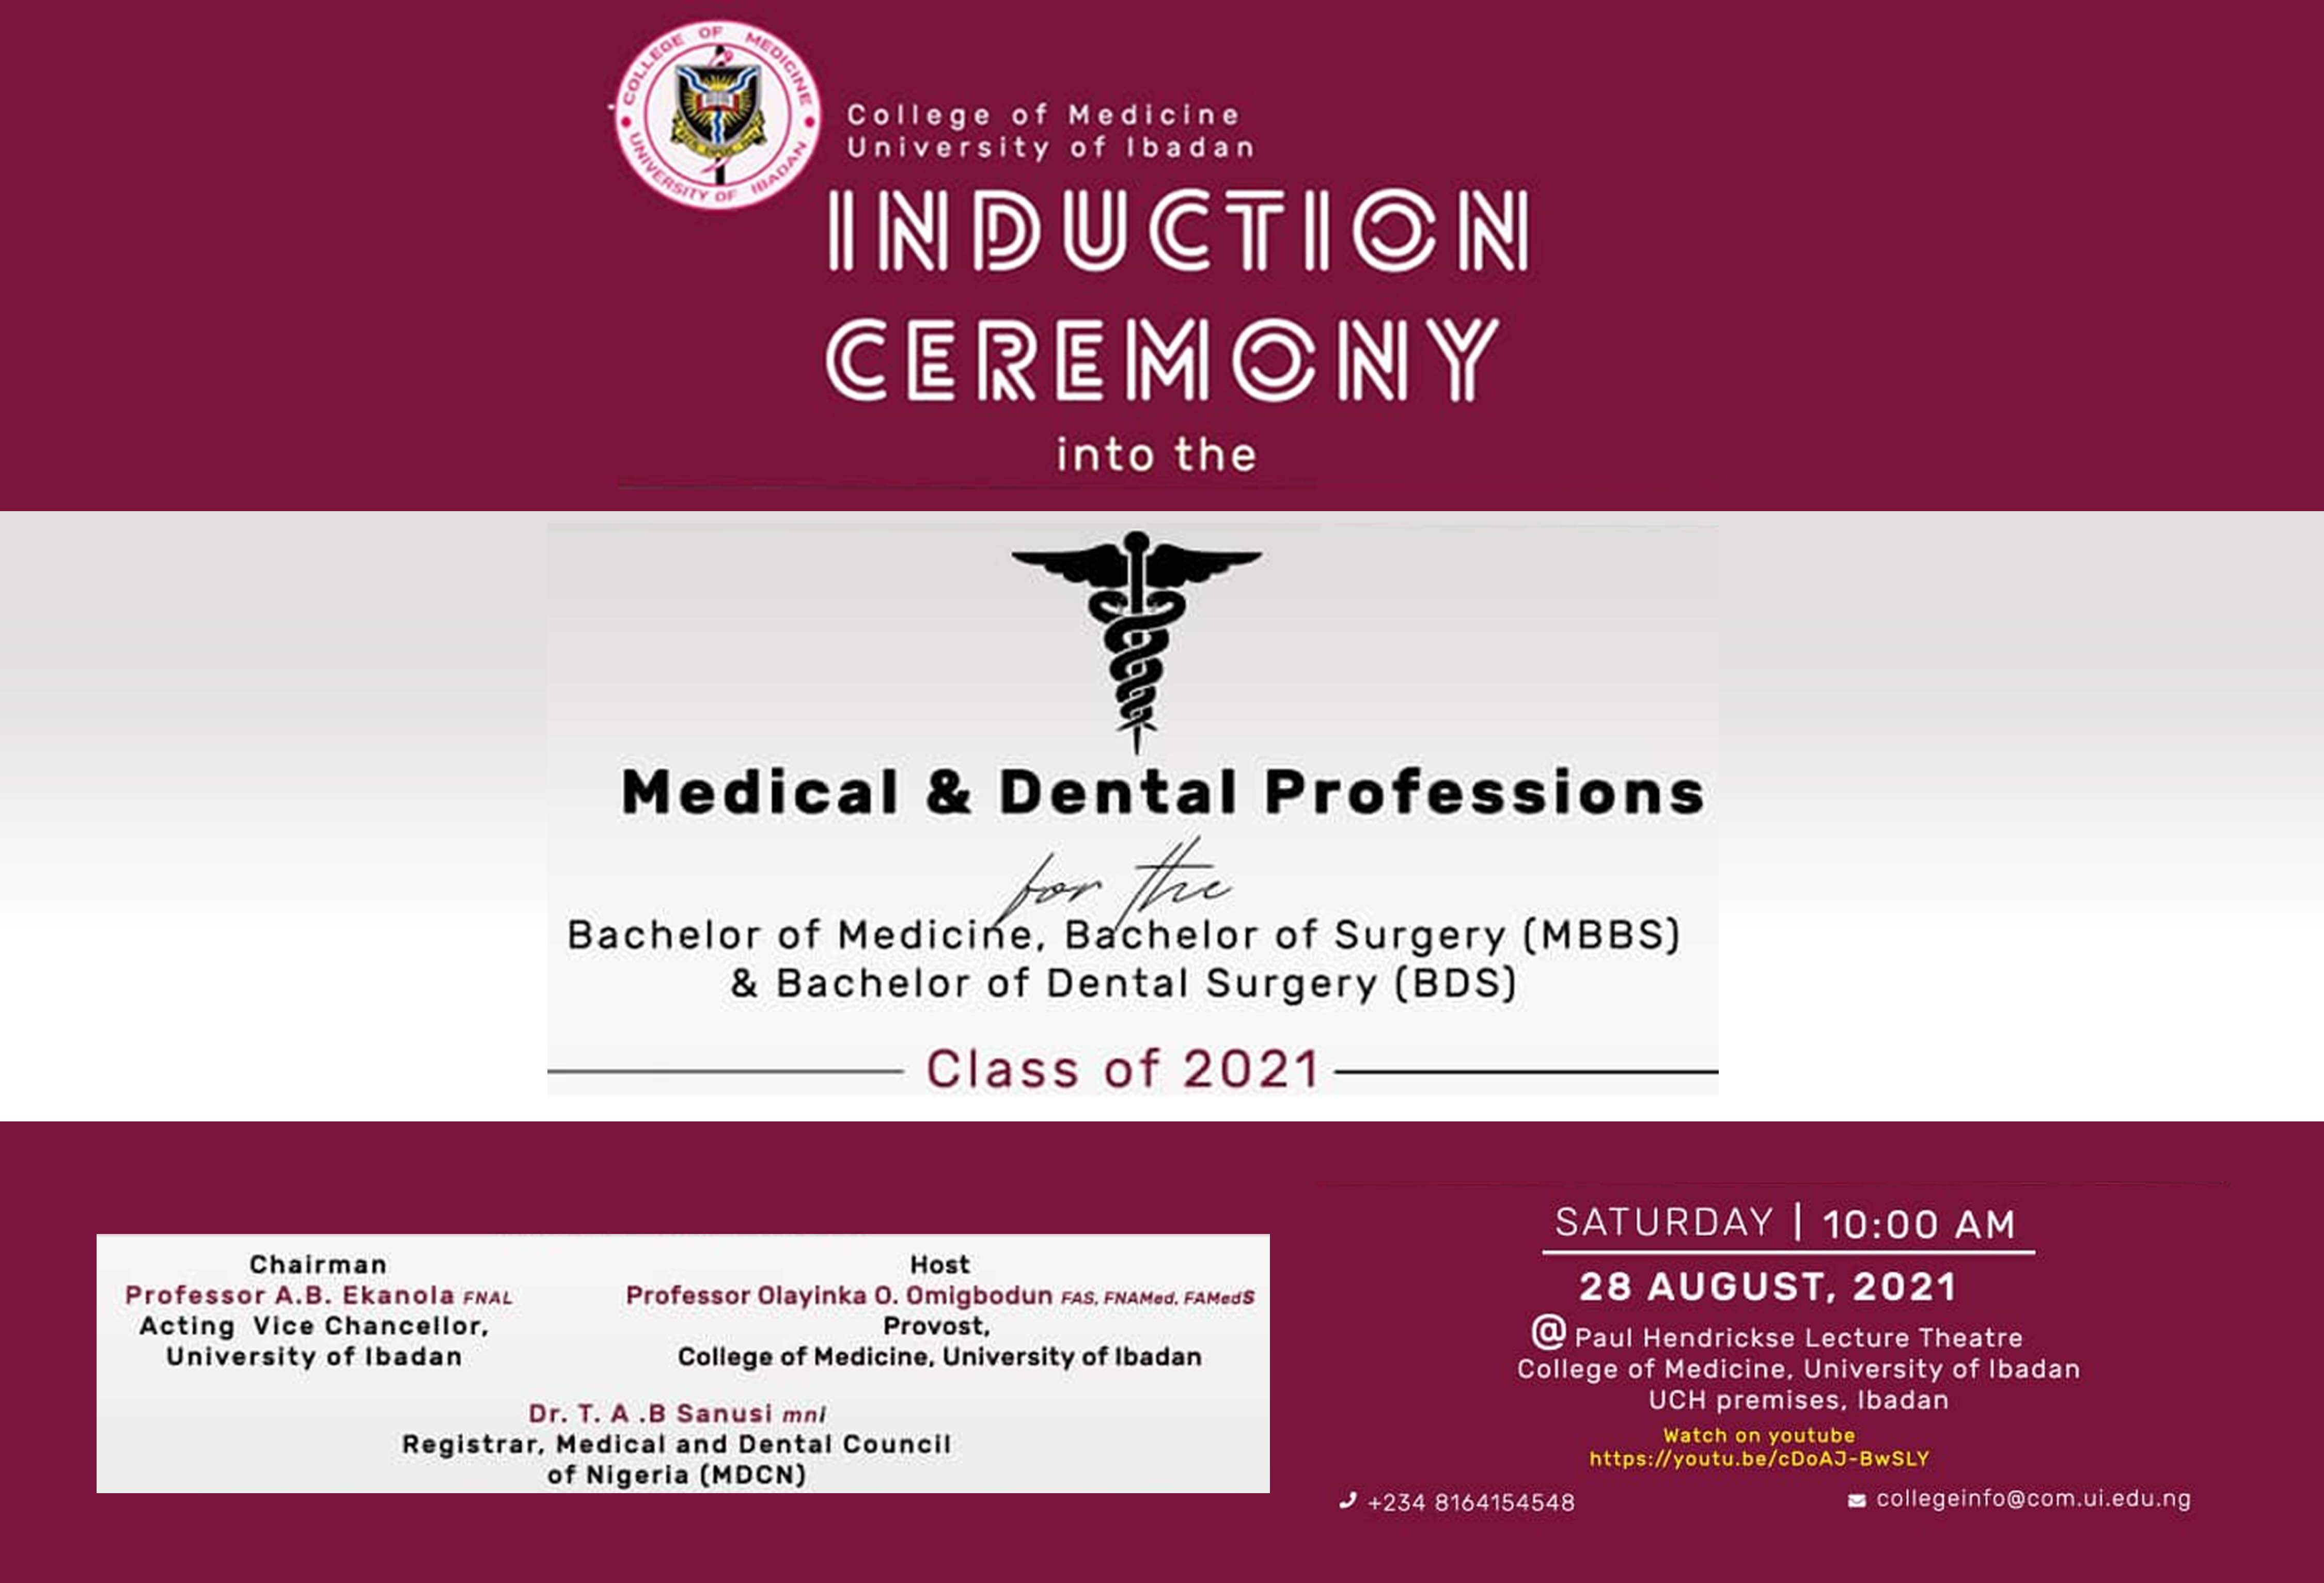 INDUCTION CEREMONY INTO THE MEDICAL AND DENTAL PROFESSIONS FOR THE MBBS AND BDS CLASS OF 2021